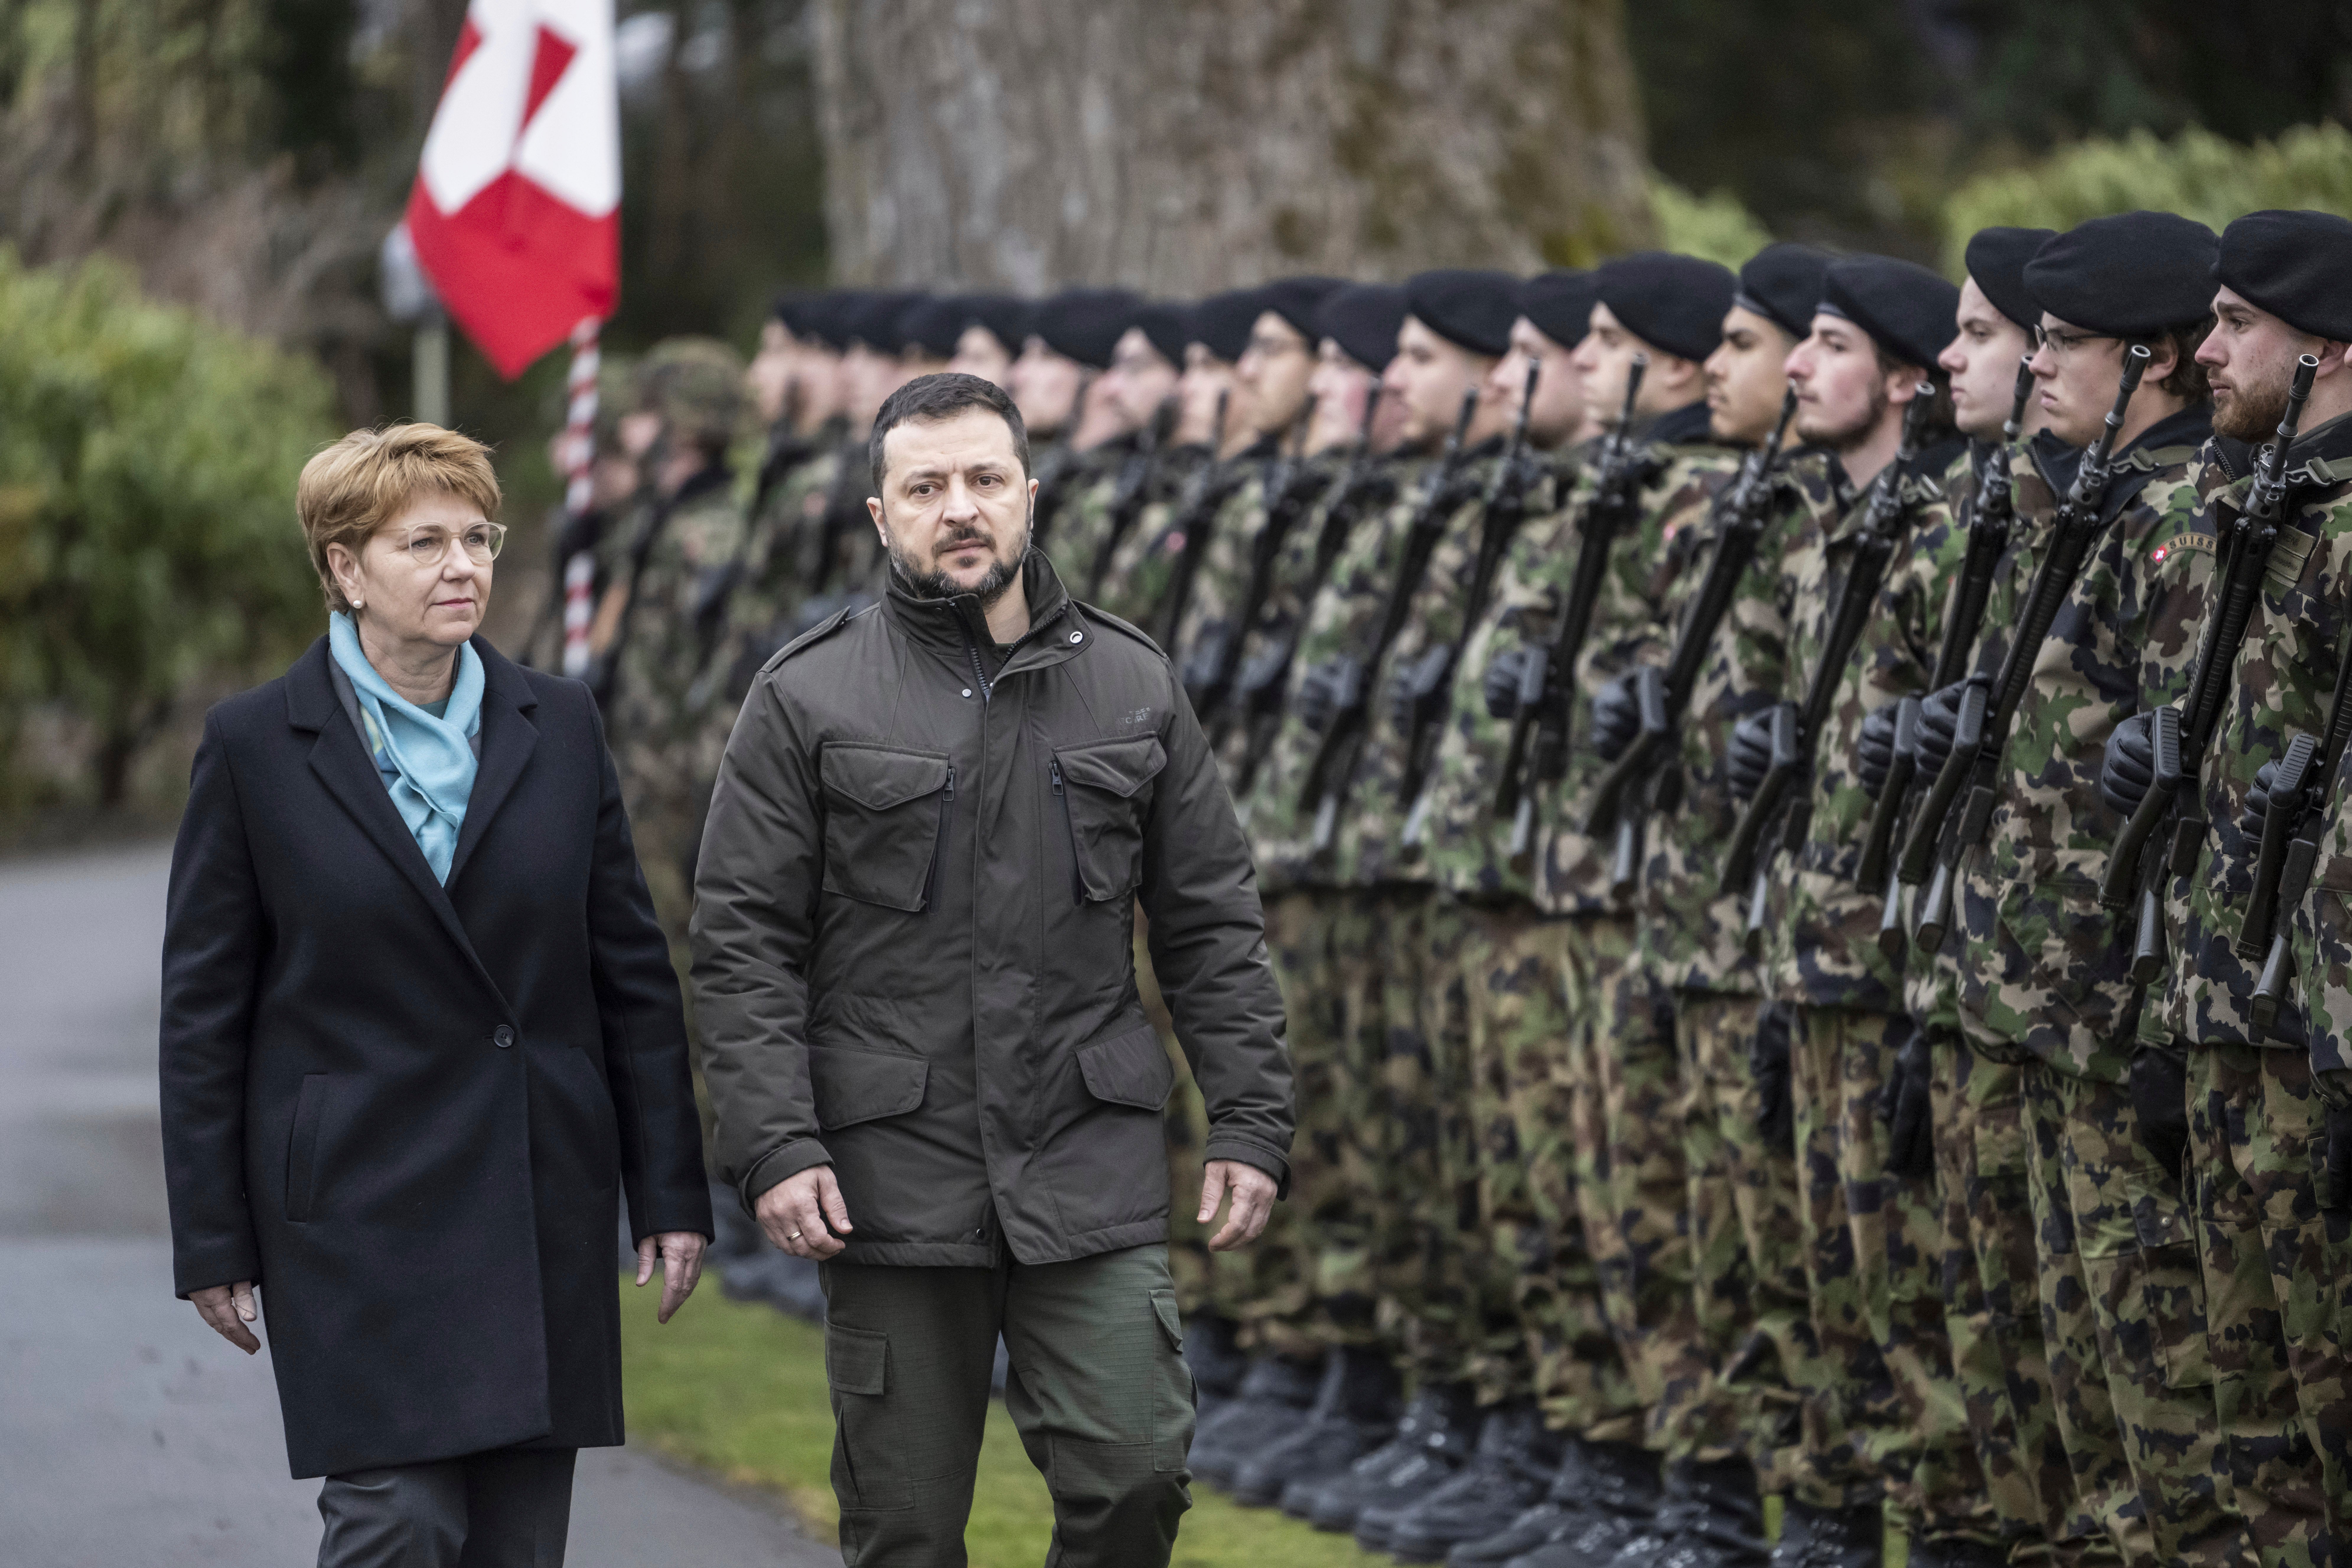 Swiss Federal President Viola Amherd, left, and her guest, Volodymyr Zelenskyy, right